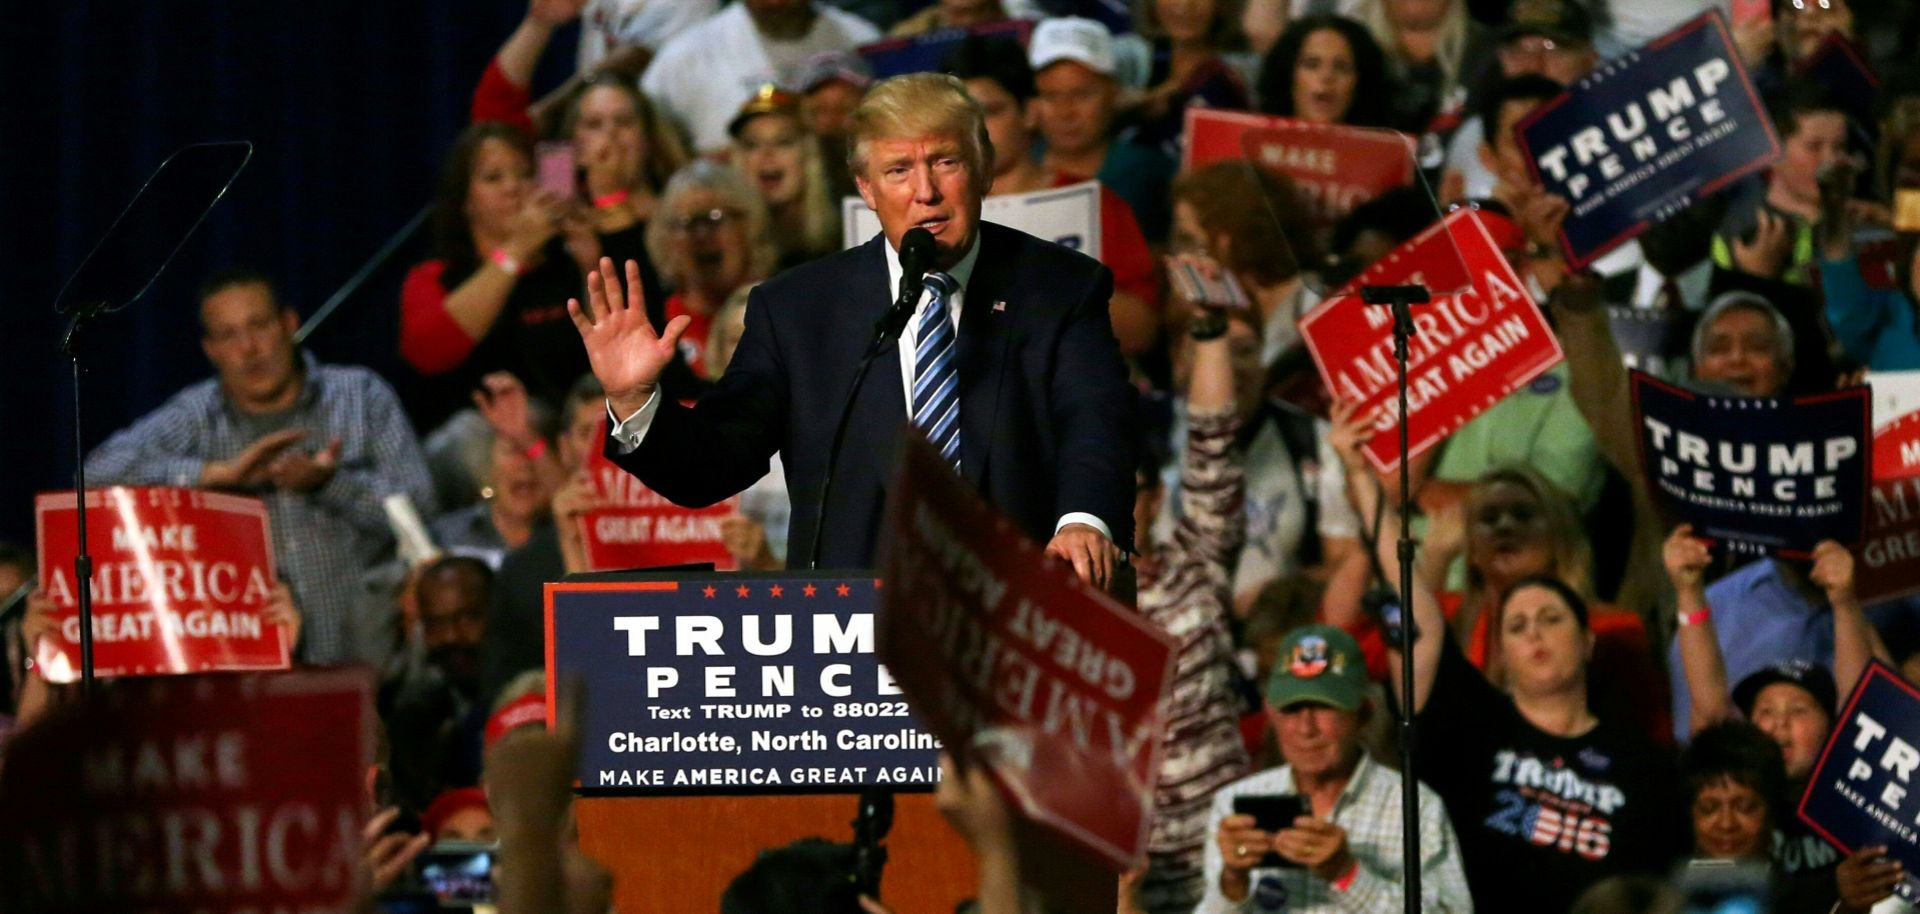 Republican presidential nominee Donald Trump addresses the crowd at a rally in Charlotte, North Carolina, on Oct. 14, 2016.